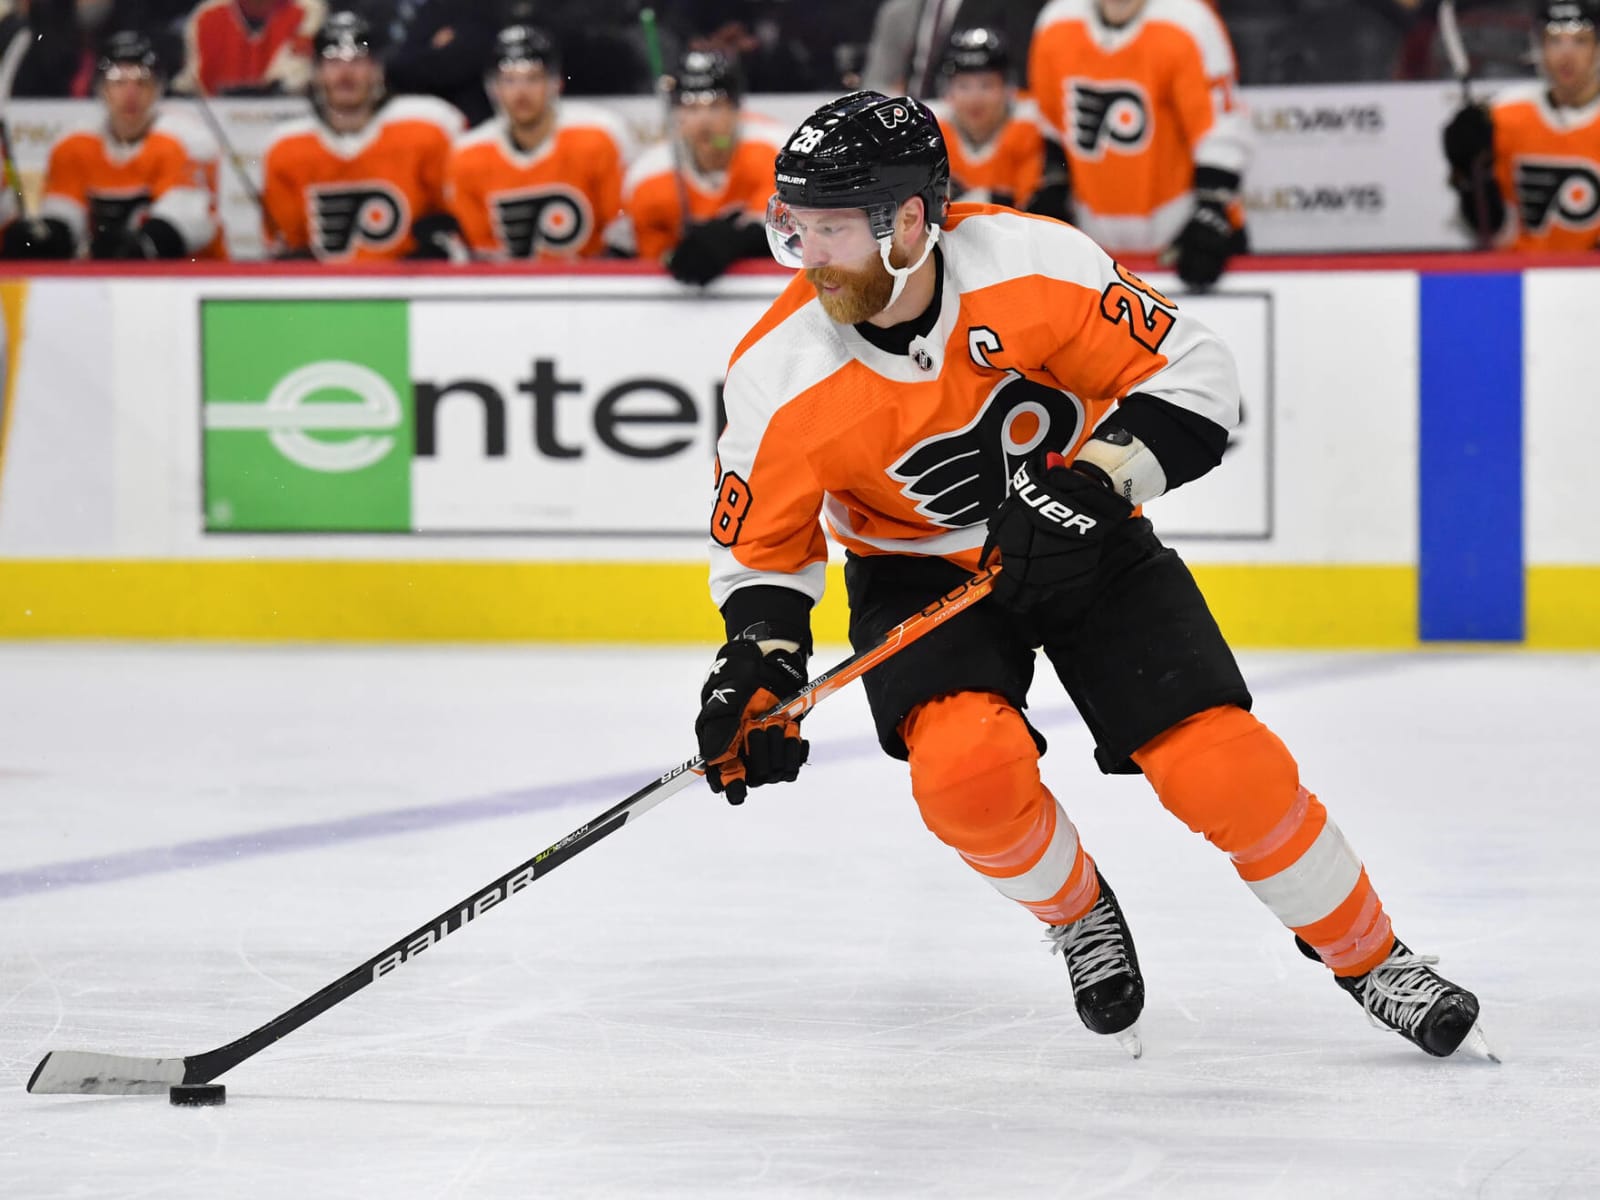 Claude Giroux plays 1,000th game for Flyers